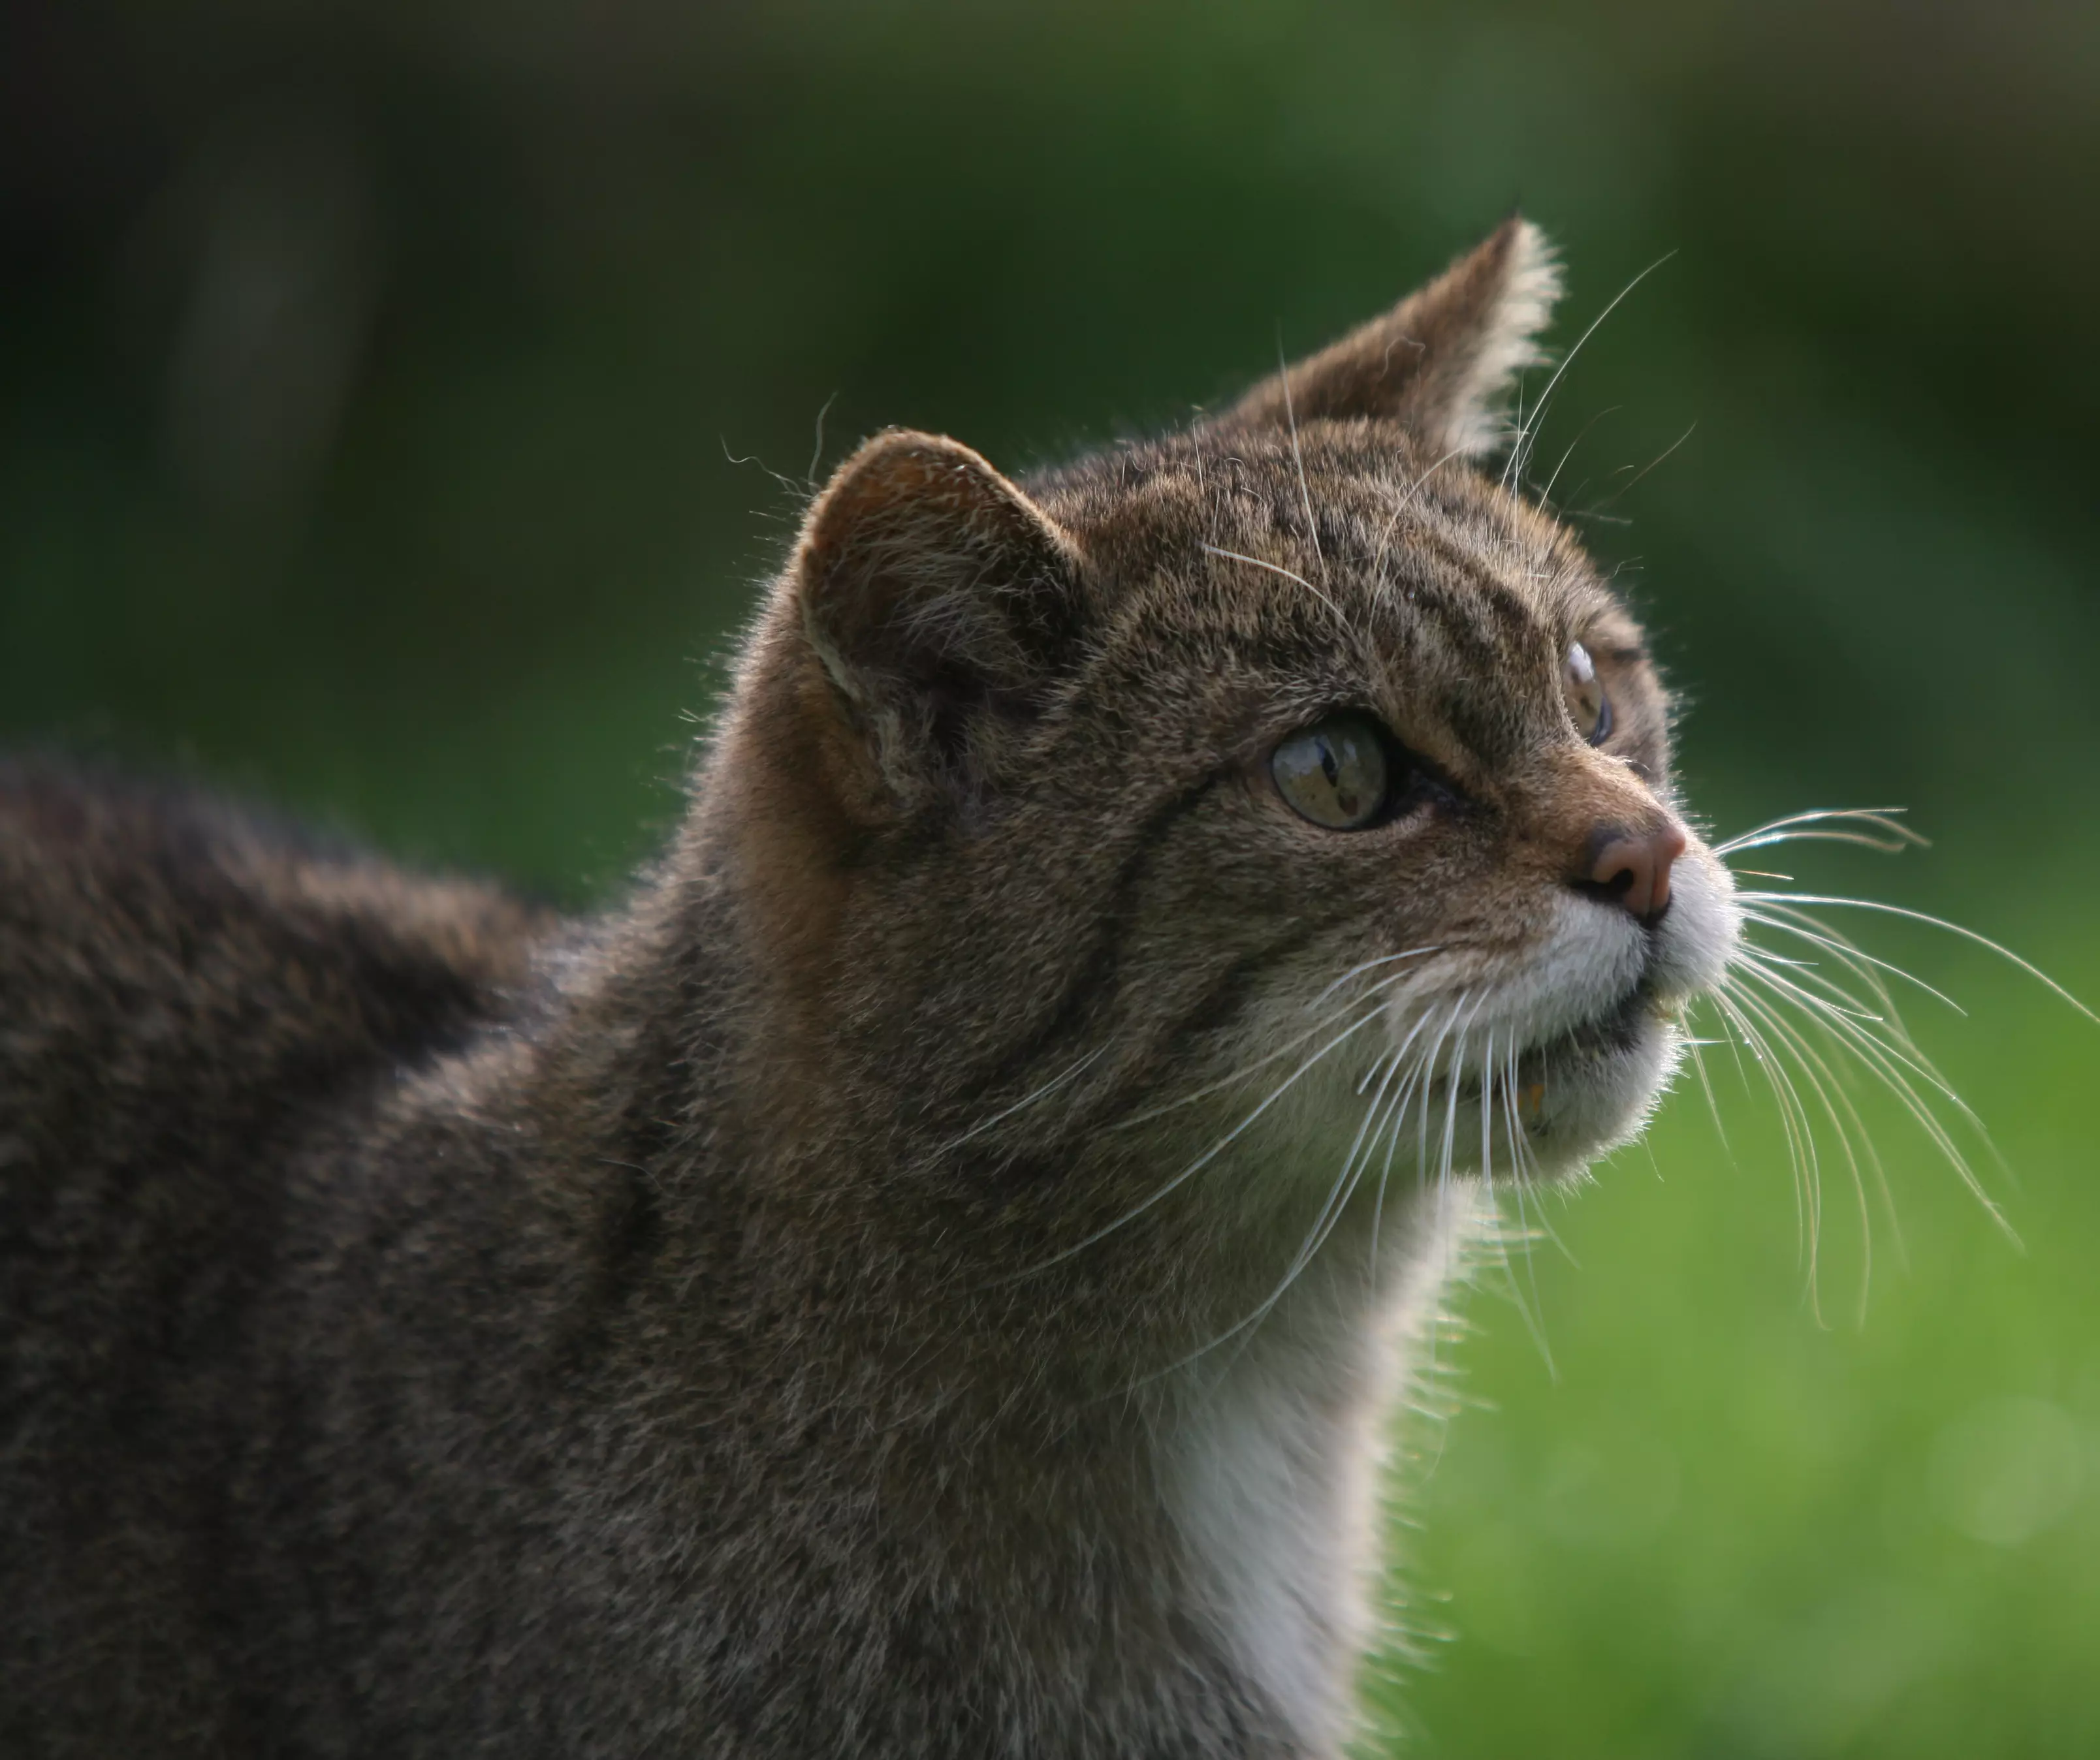 Wildcats are among the mammals at risk of extinction.